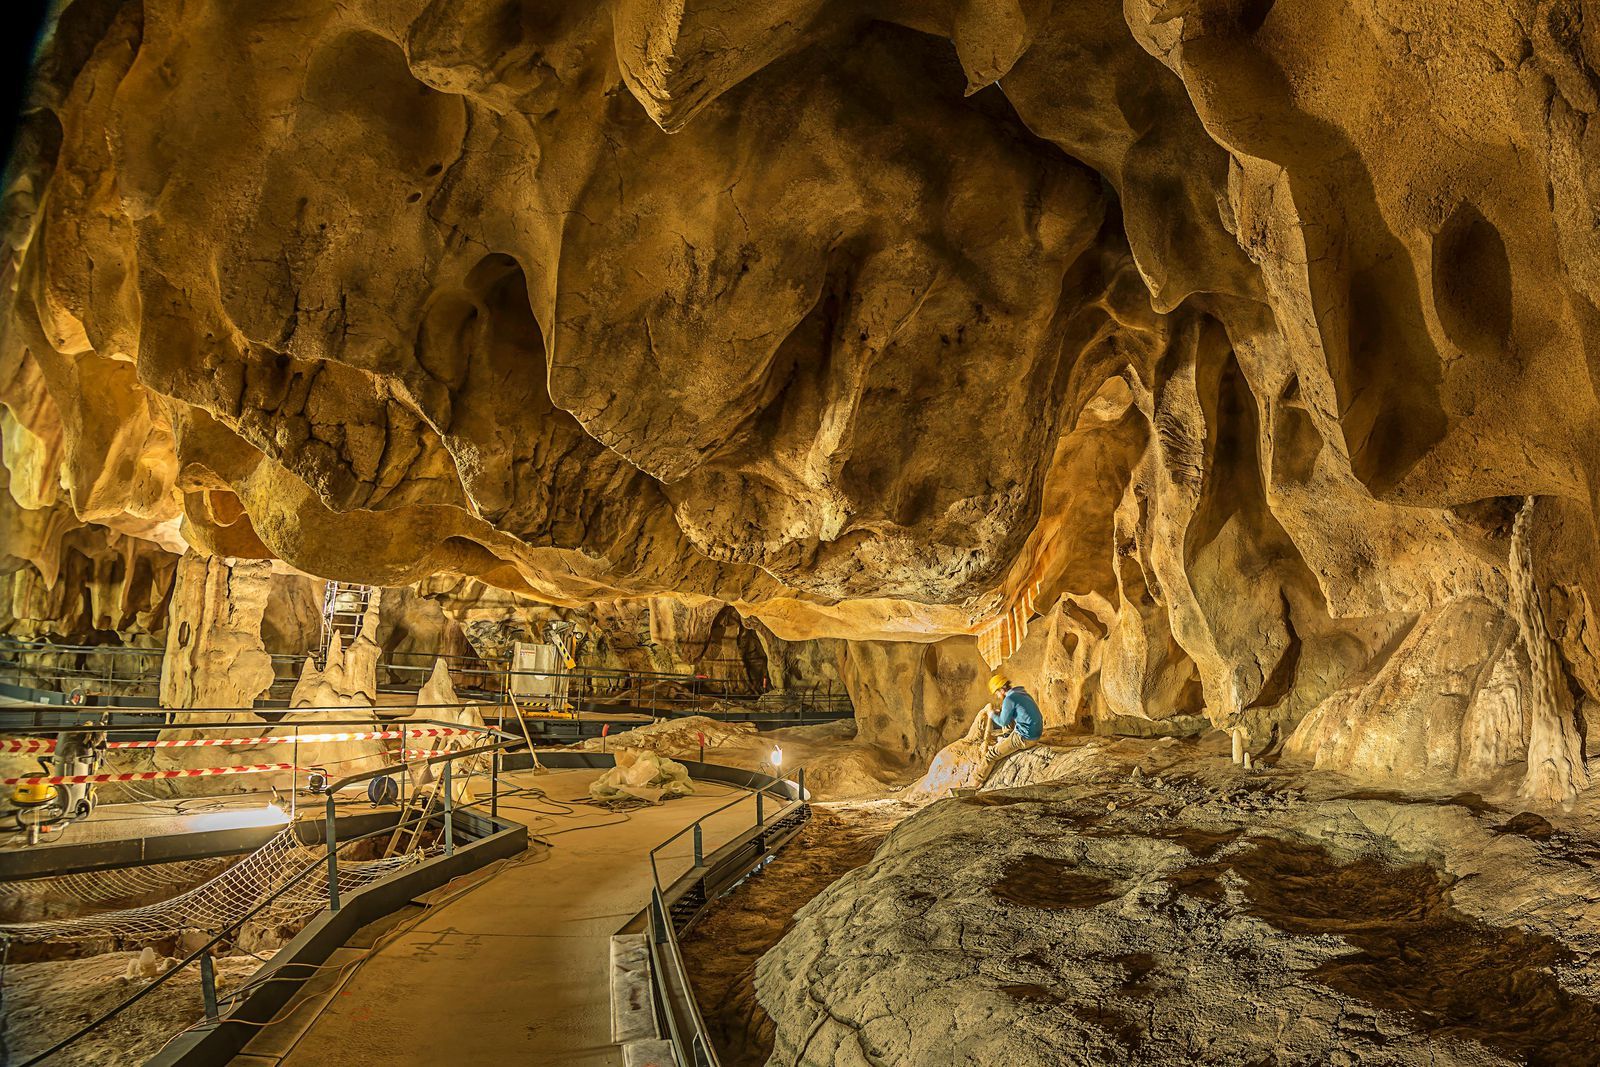 Finally, the Beauty of France's Chauvet Cave Makes its Grand